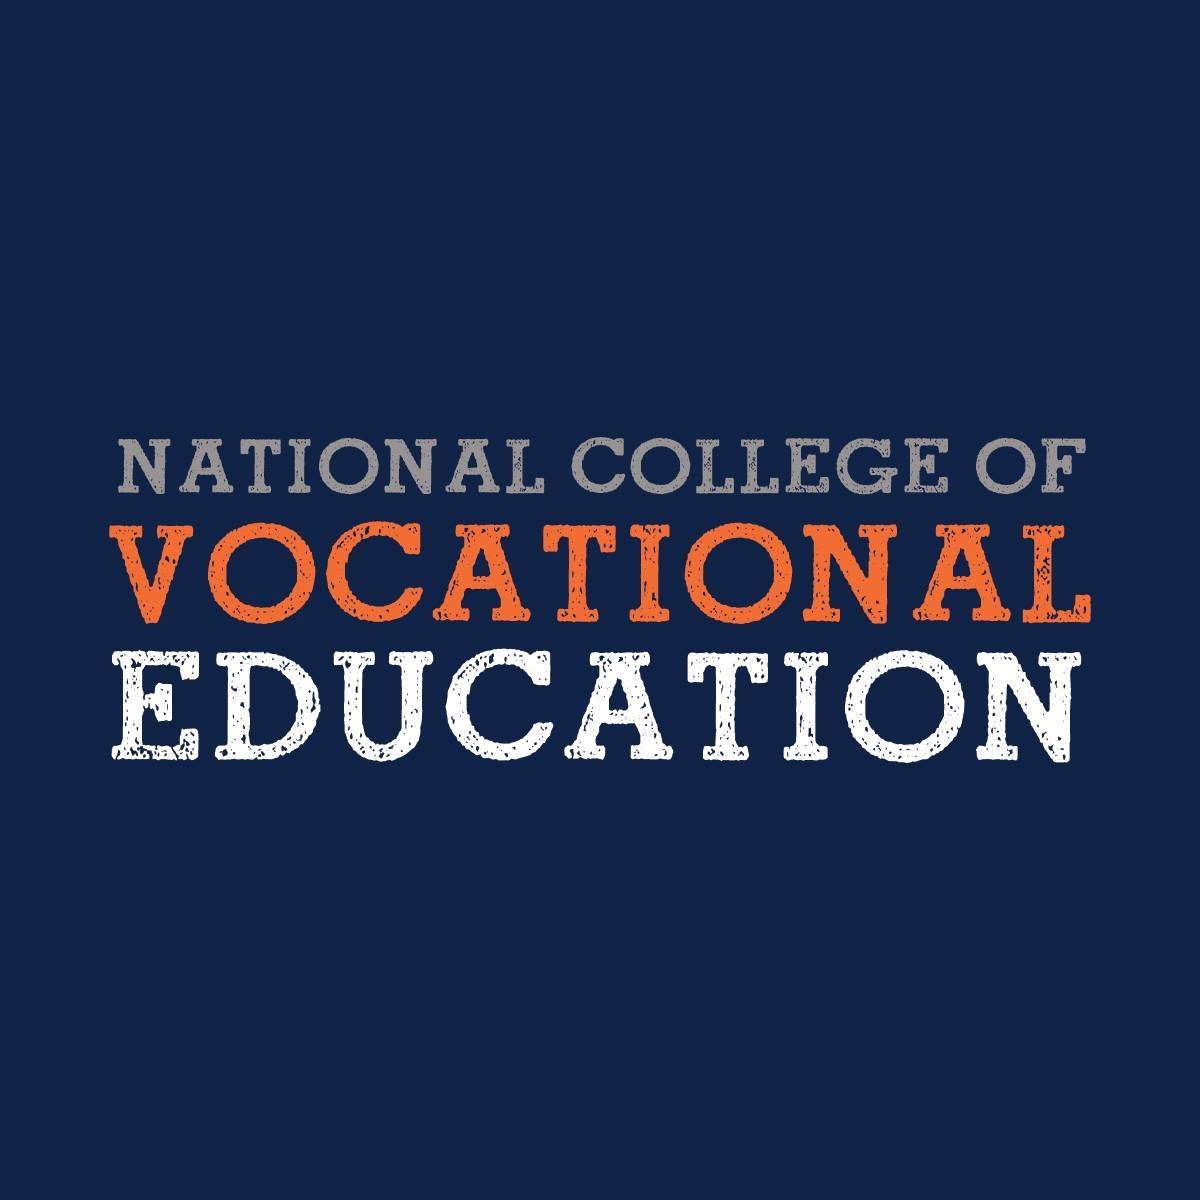 National College of Vocational Education Logo